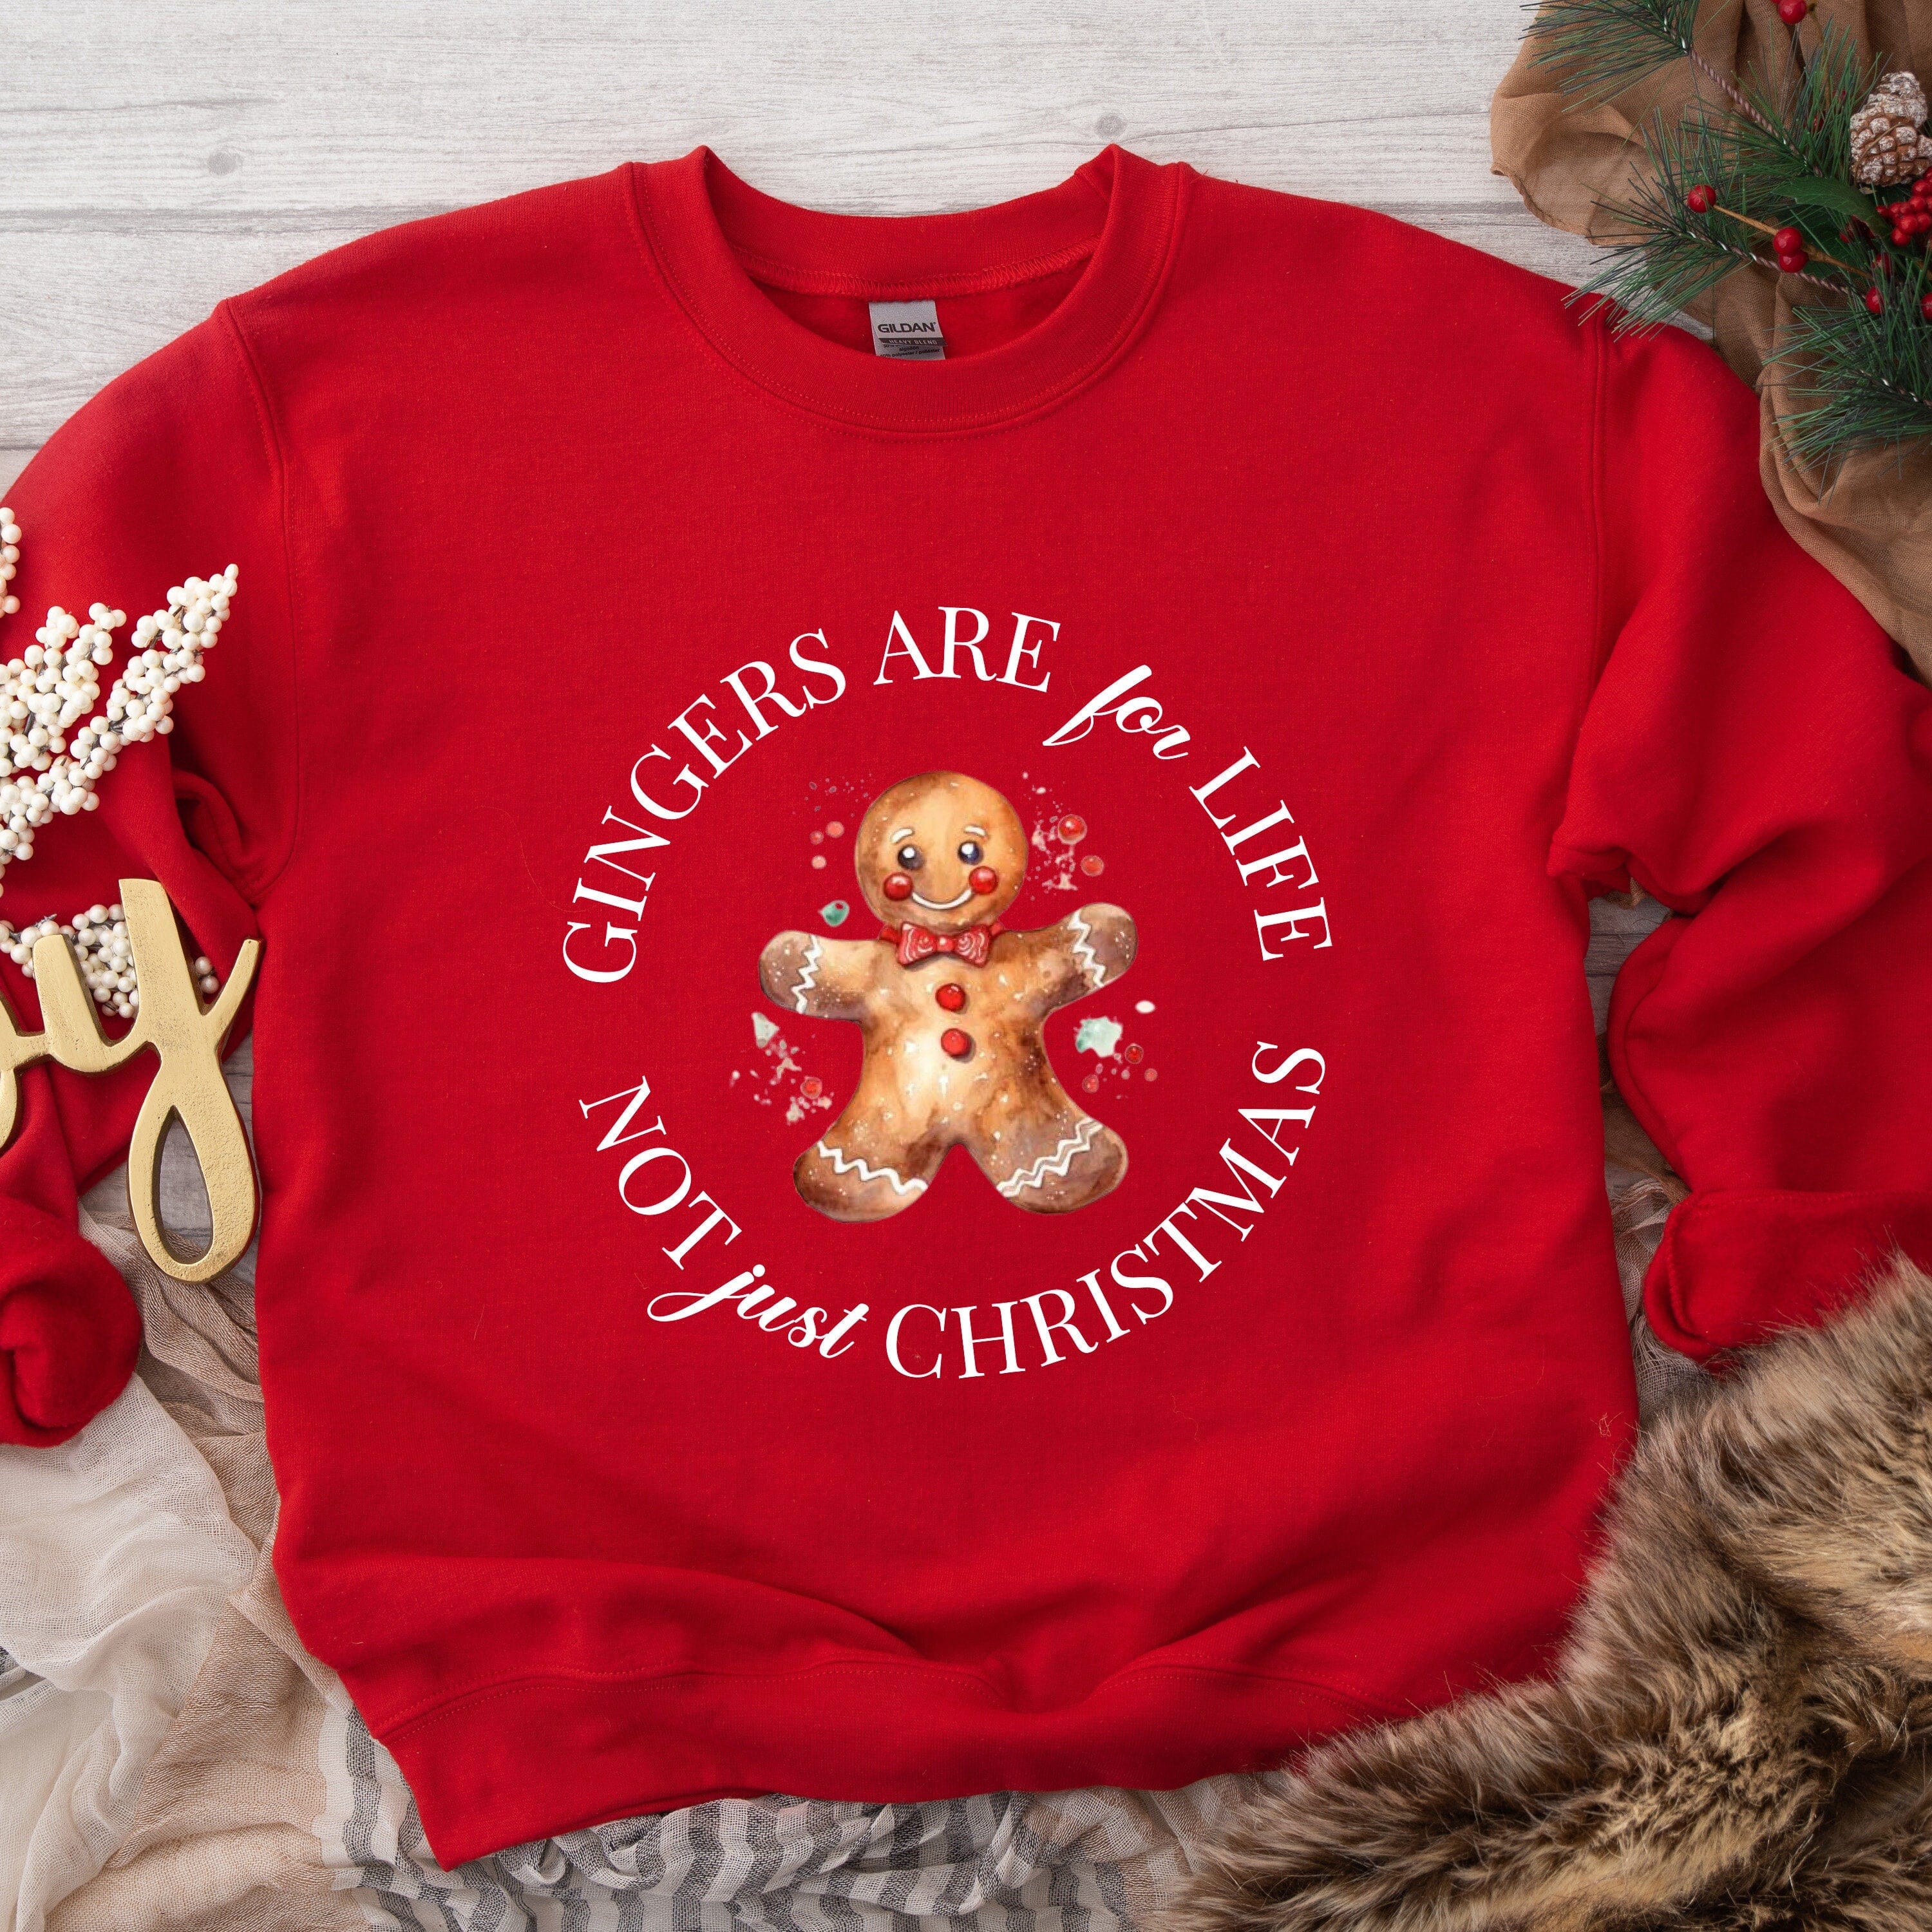 Gingers Are For Life Not Just Christmas Jumper With Gingerman Cookie, Xmas Sweatshirt, Cosy Gift For Her Women